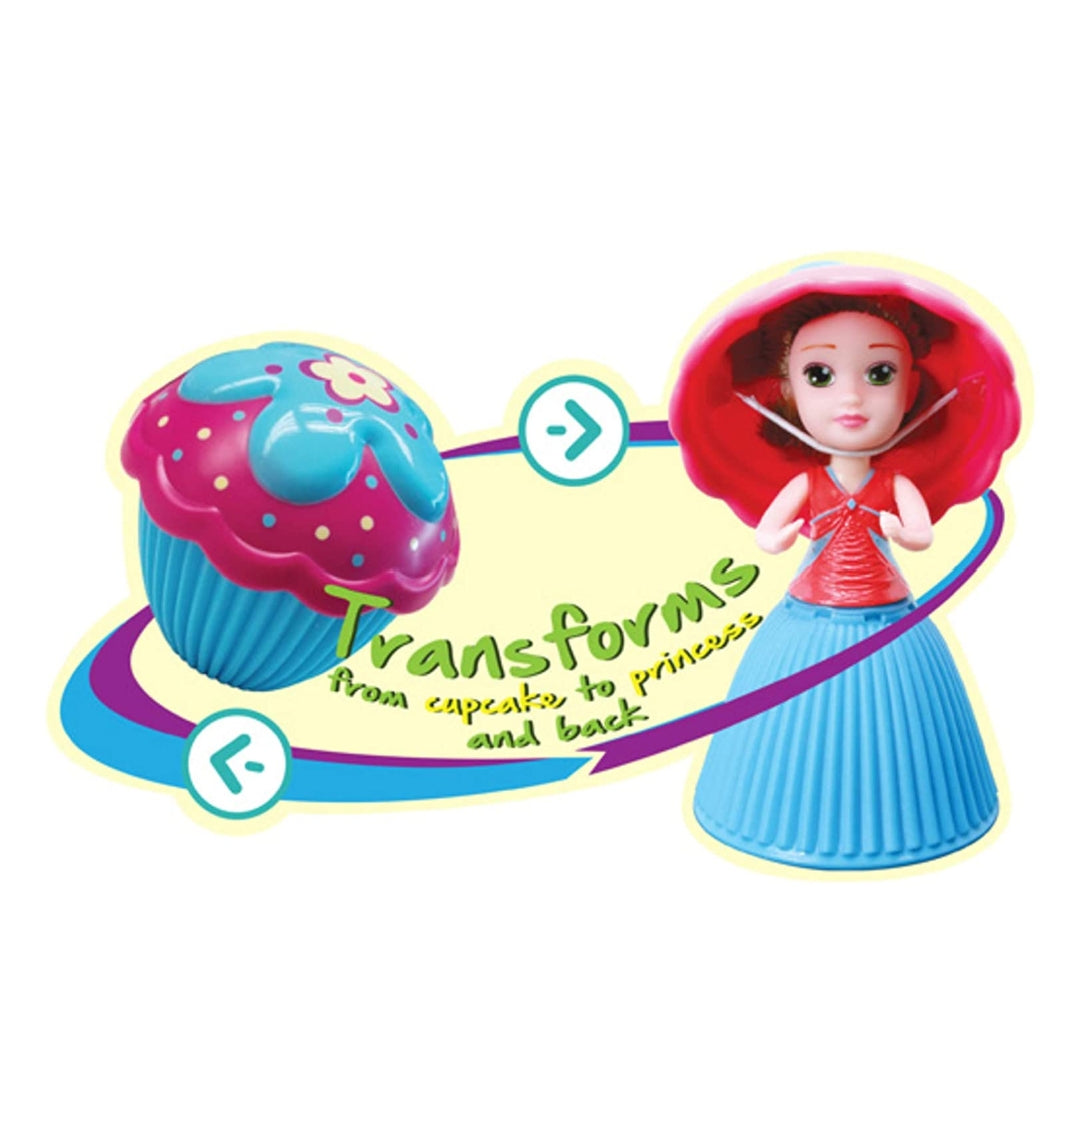 Cupcake Surprise Dolls for Girl